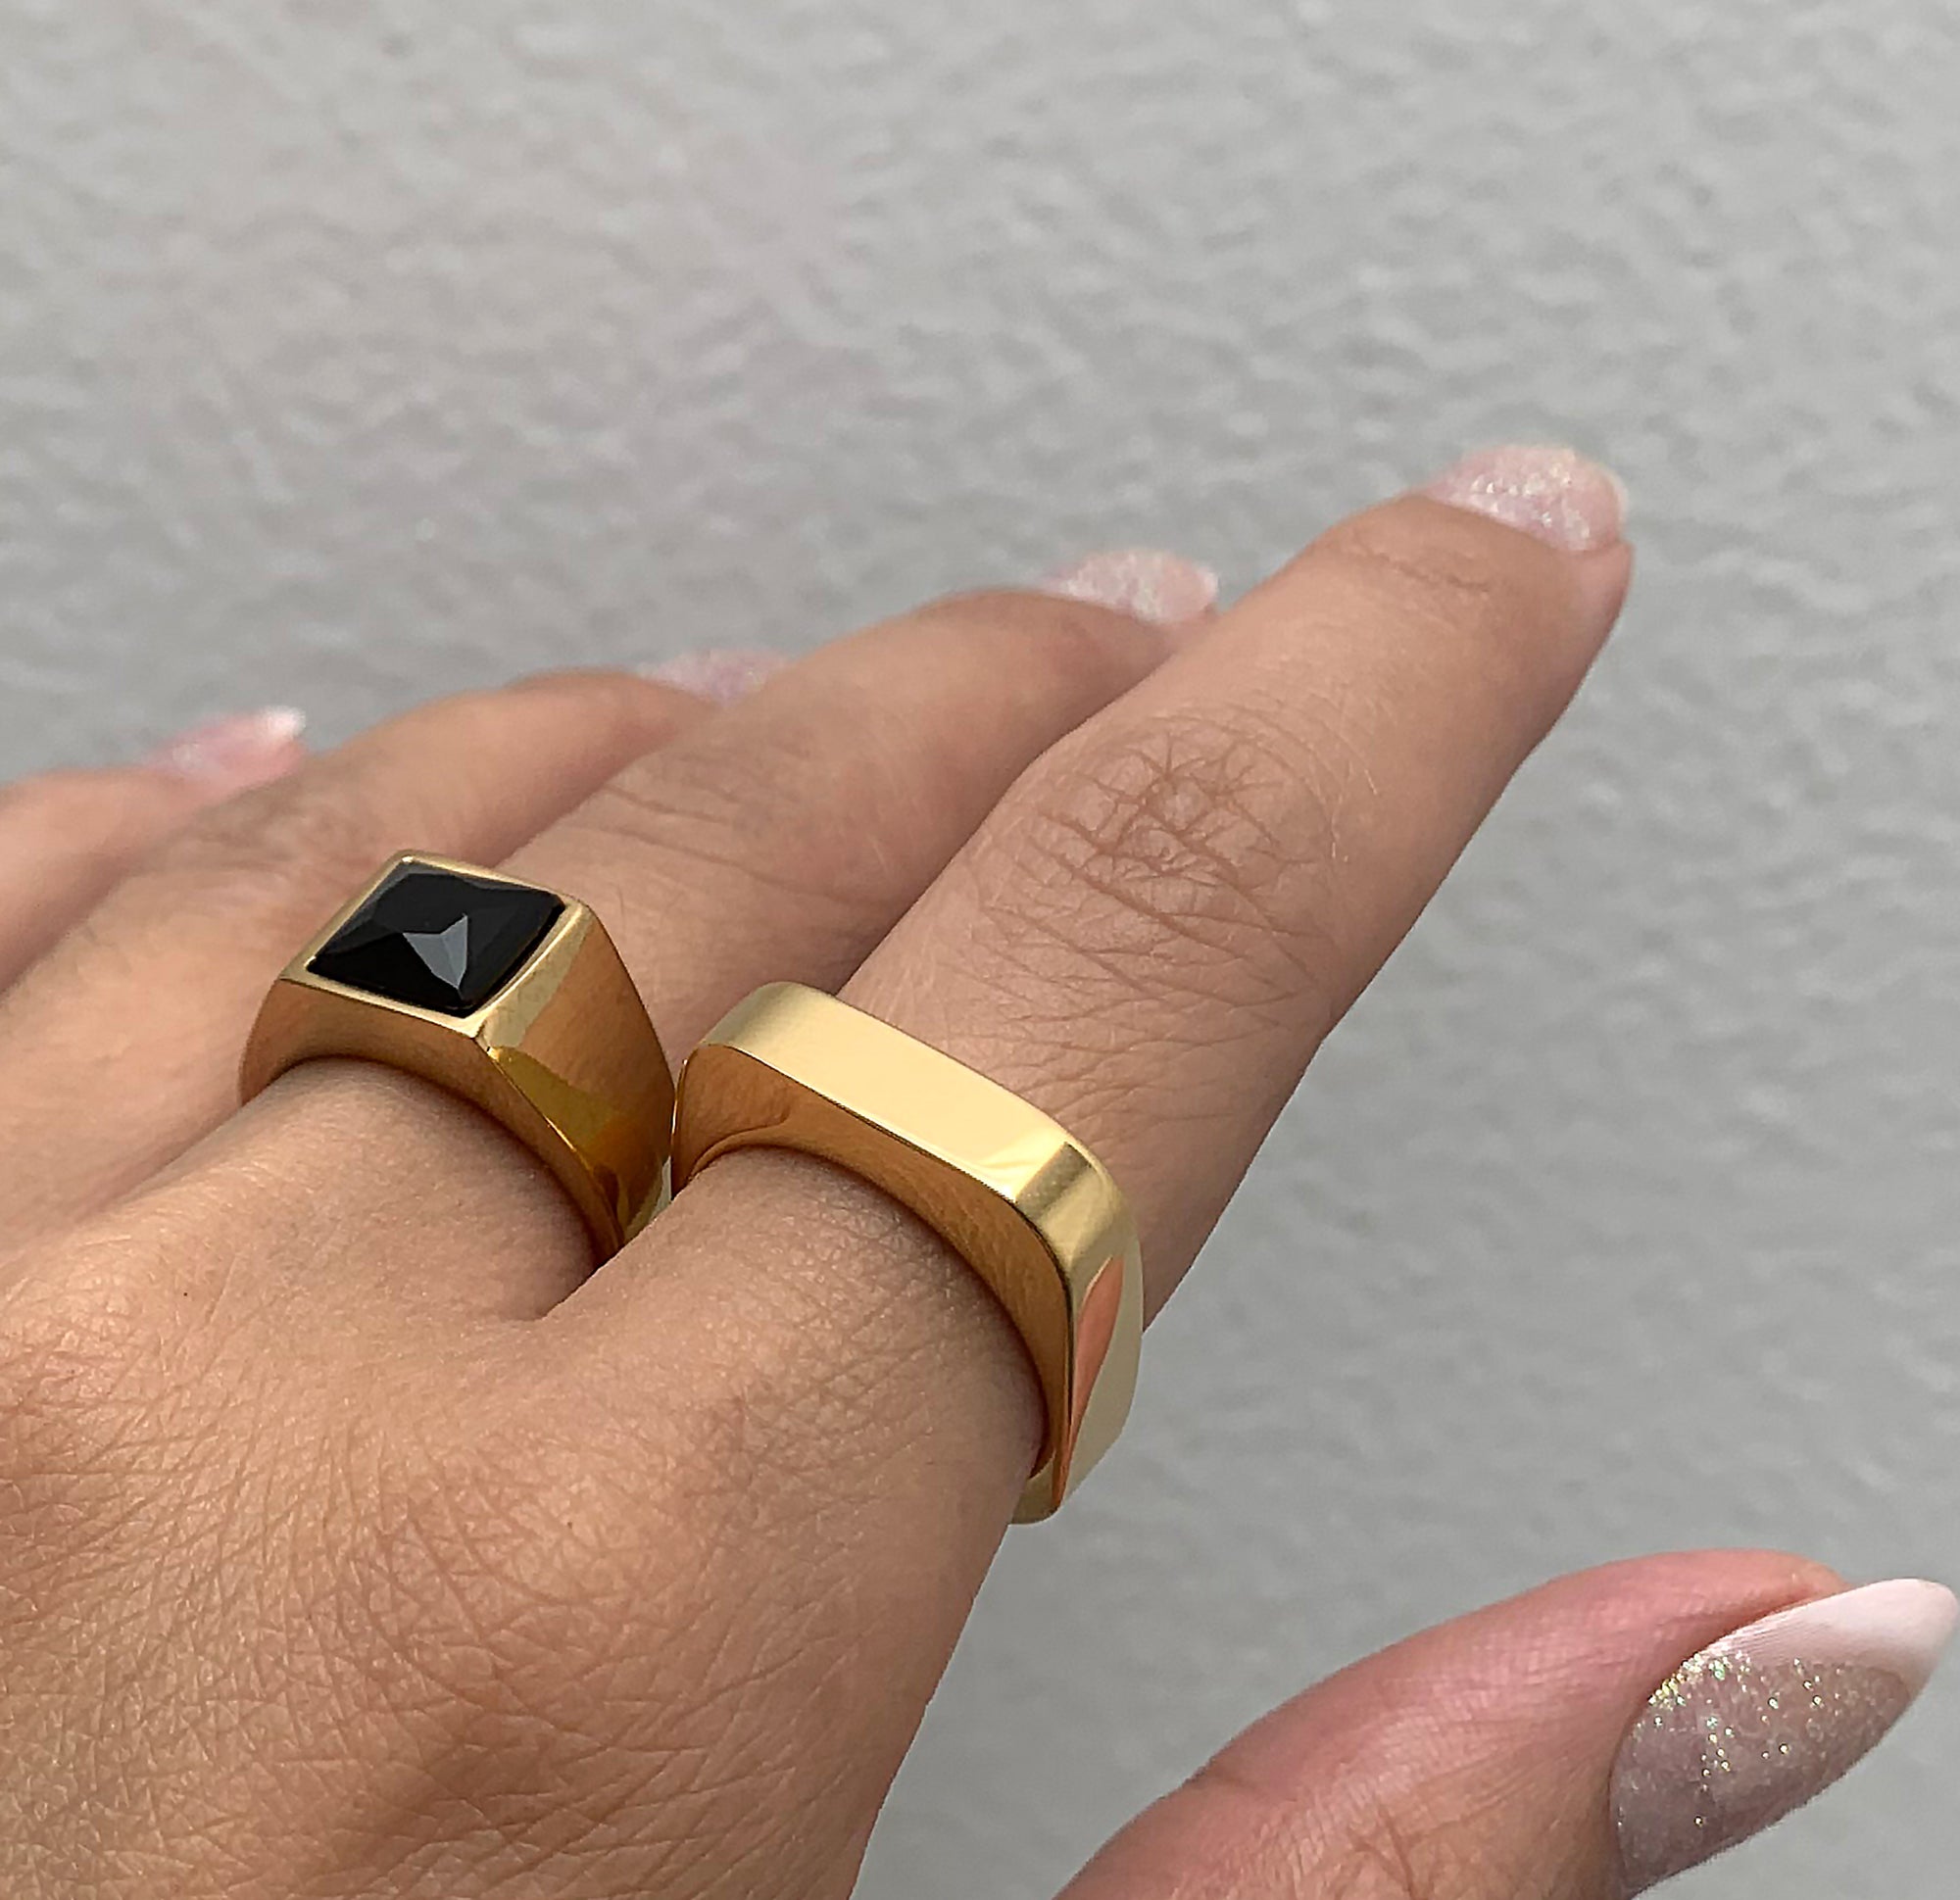 Whitney gold square ring paired with Chicago black onyx signet ring. Gold waterproof rings